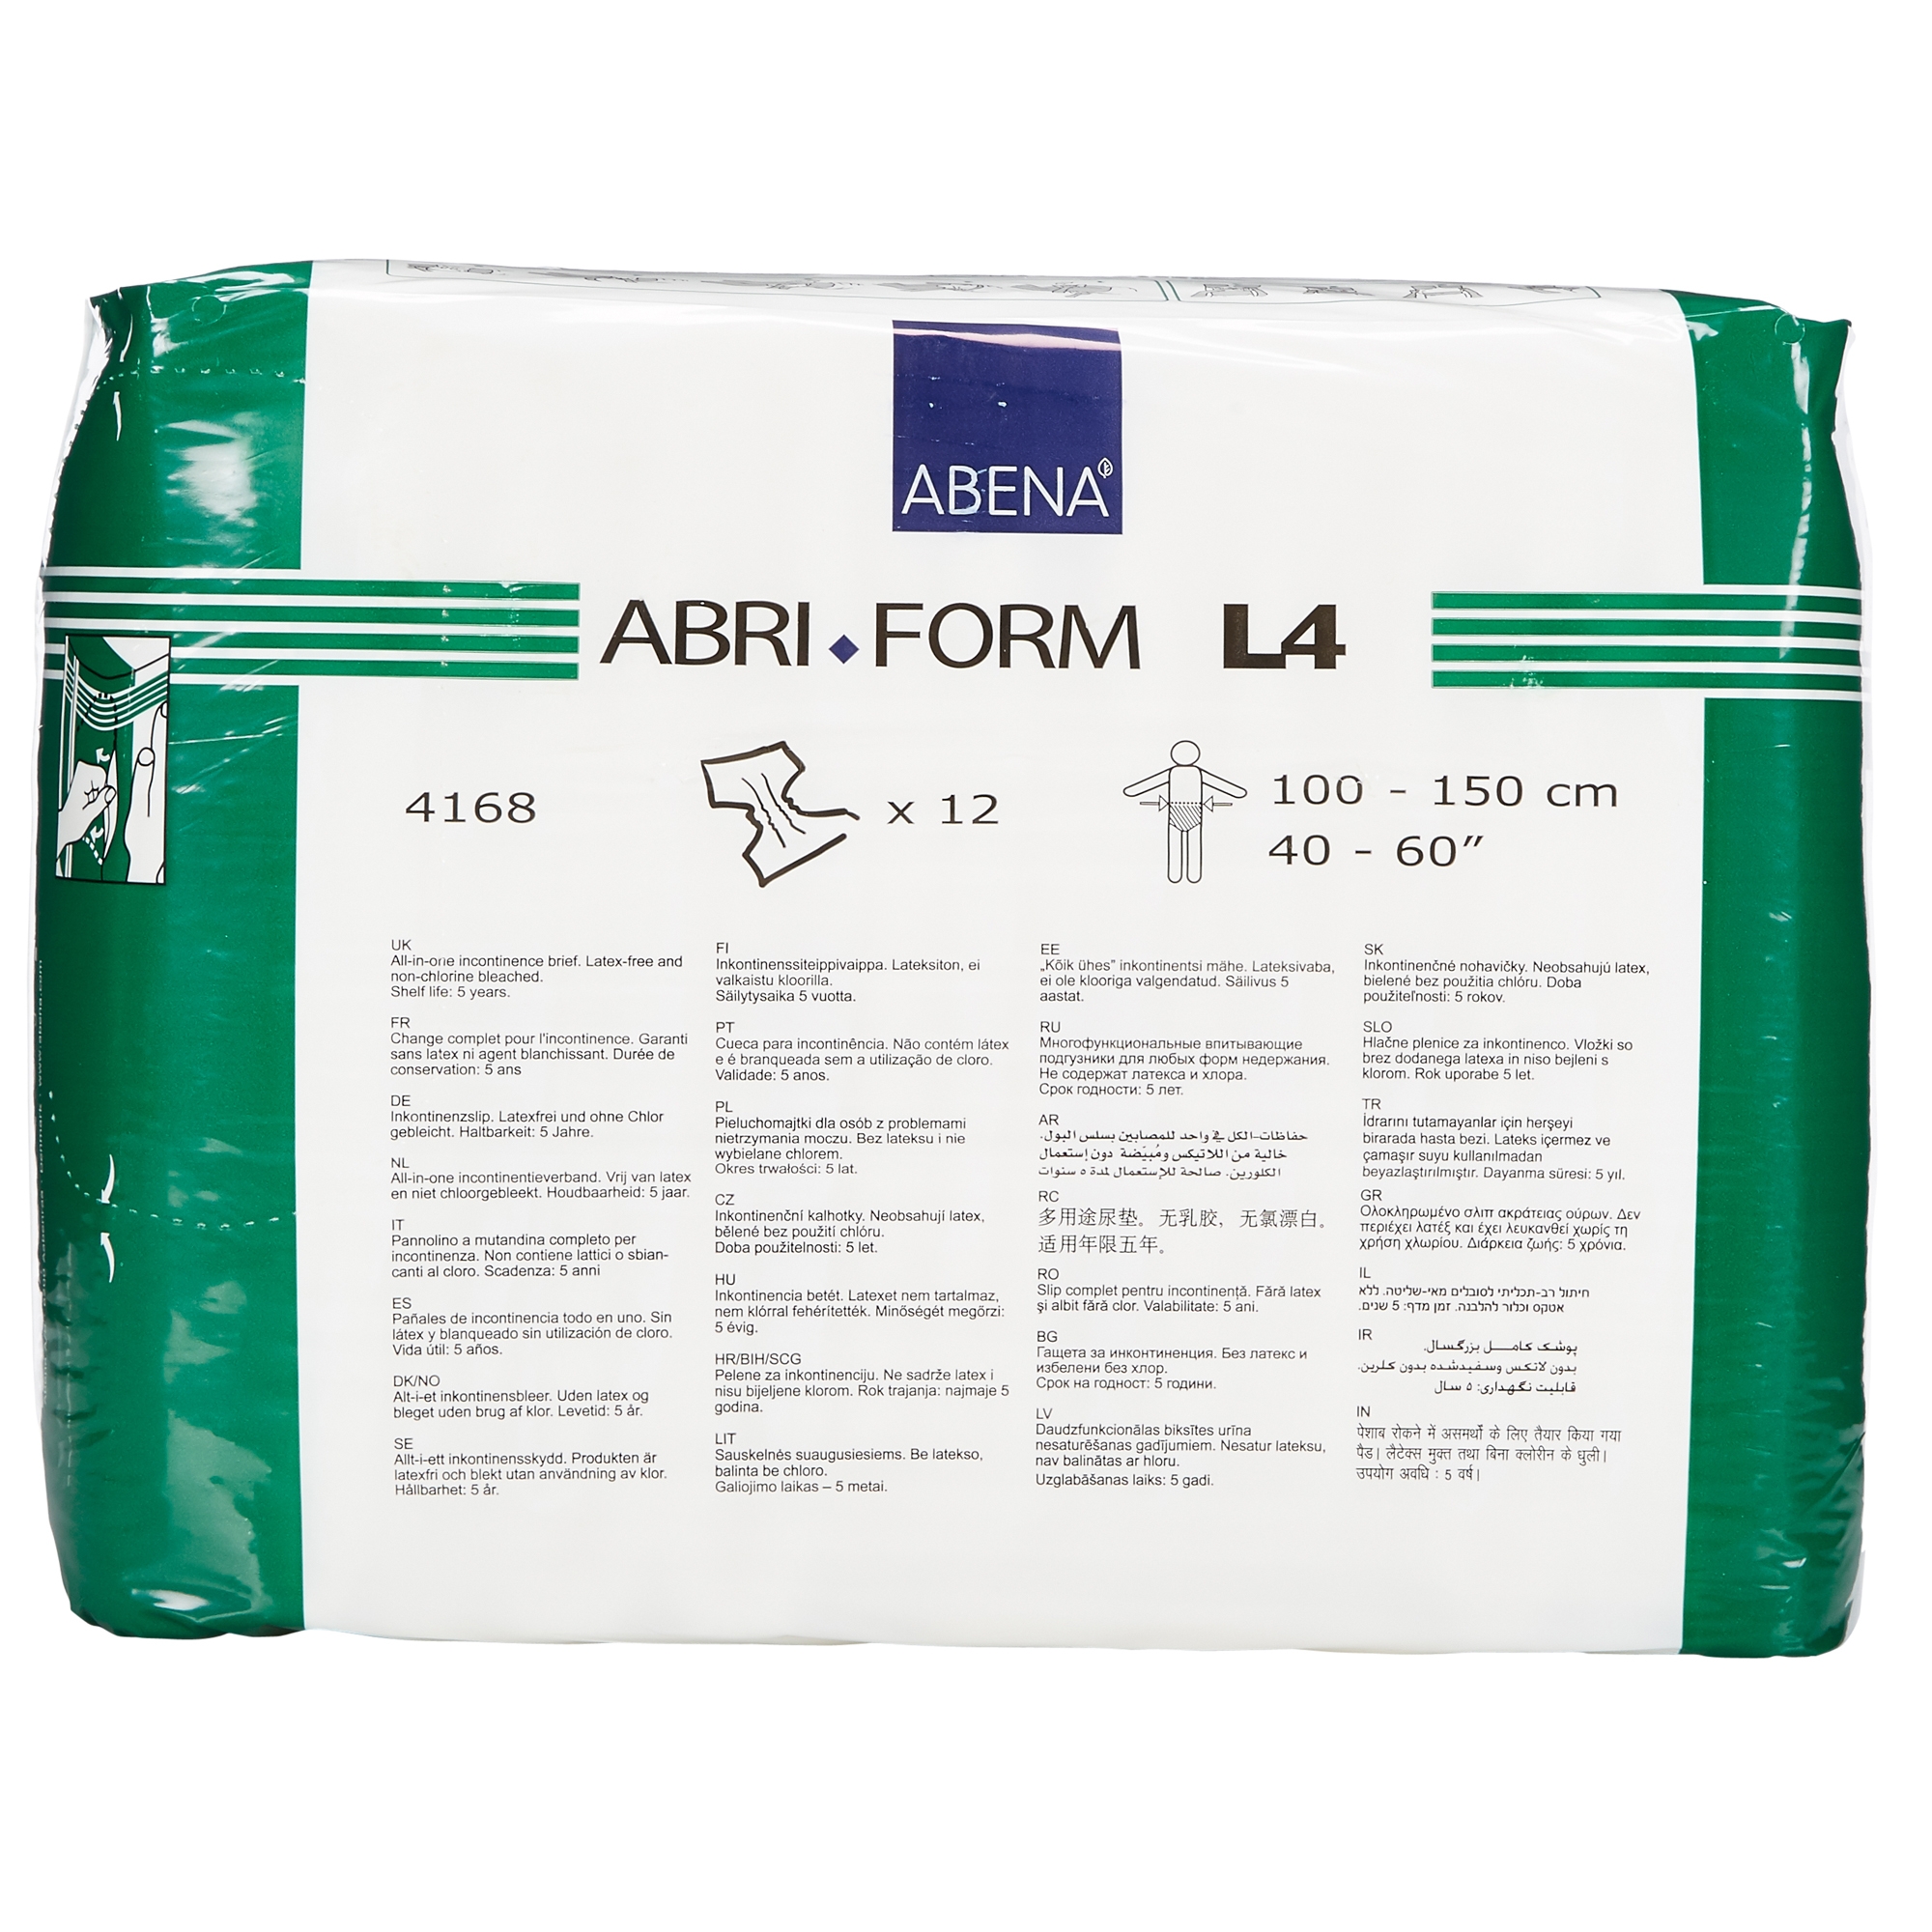 Abena Abri-Form Incontinence Briefs L4, Heavy Absorbency, Large, 12 Count, 6 Packs, 72 Total - image 3 of 4